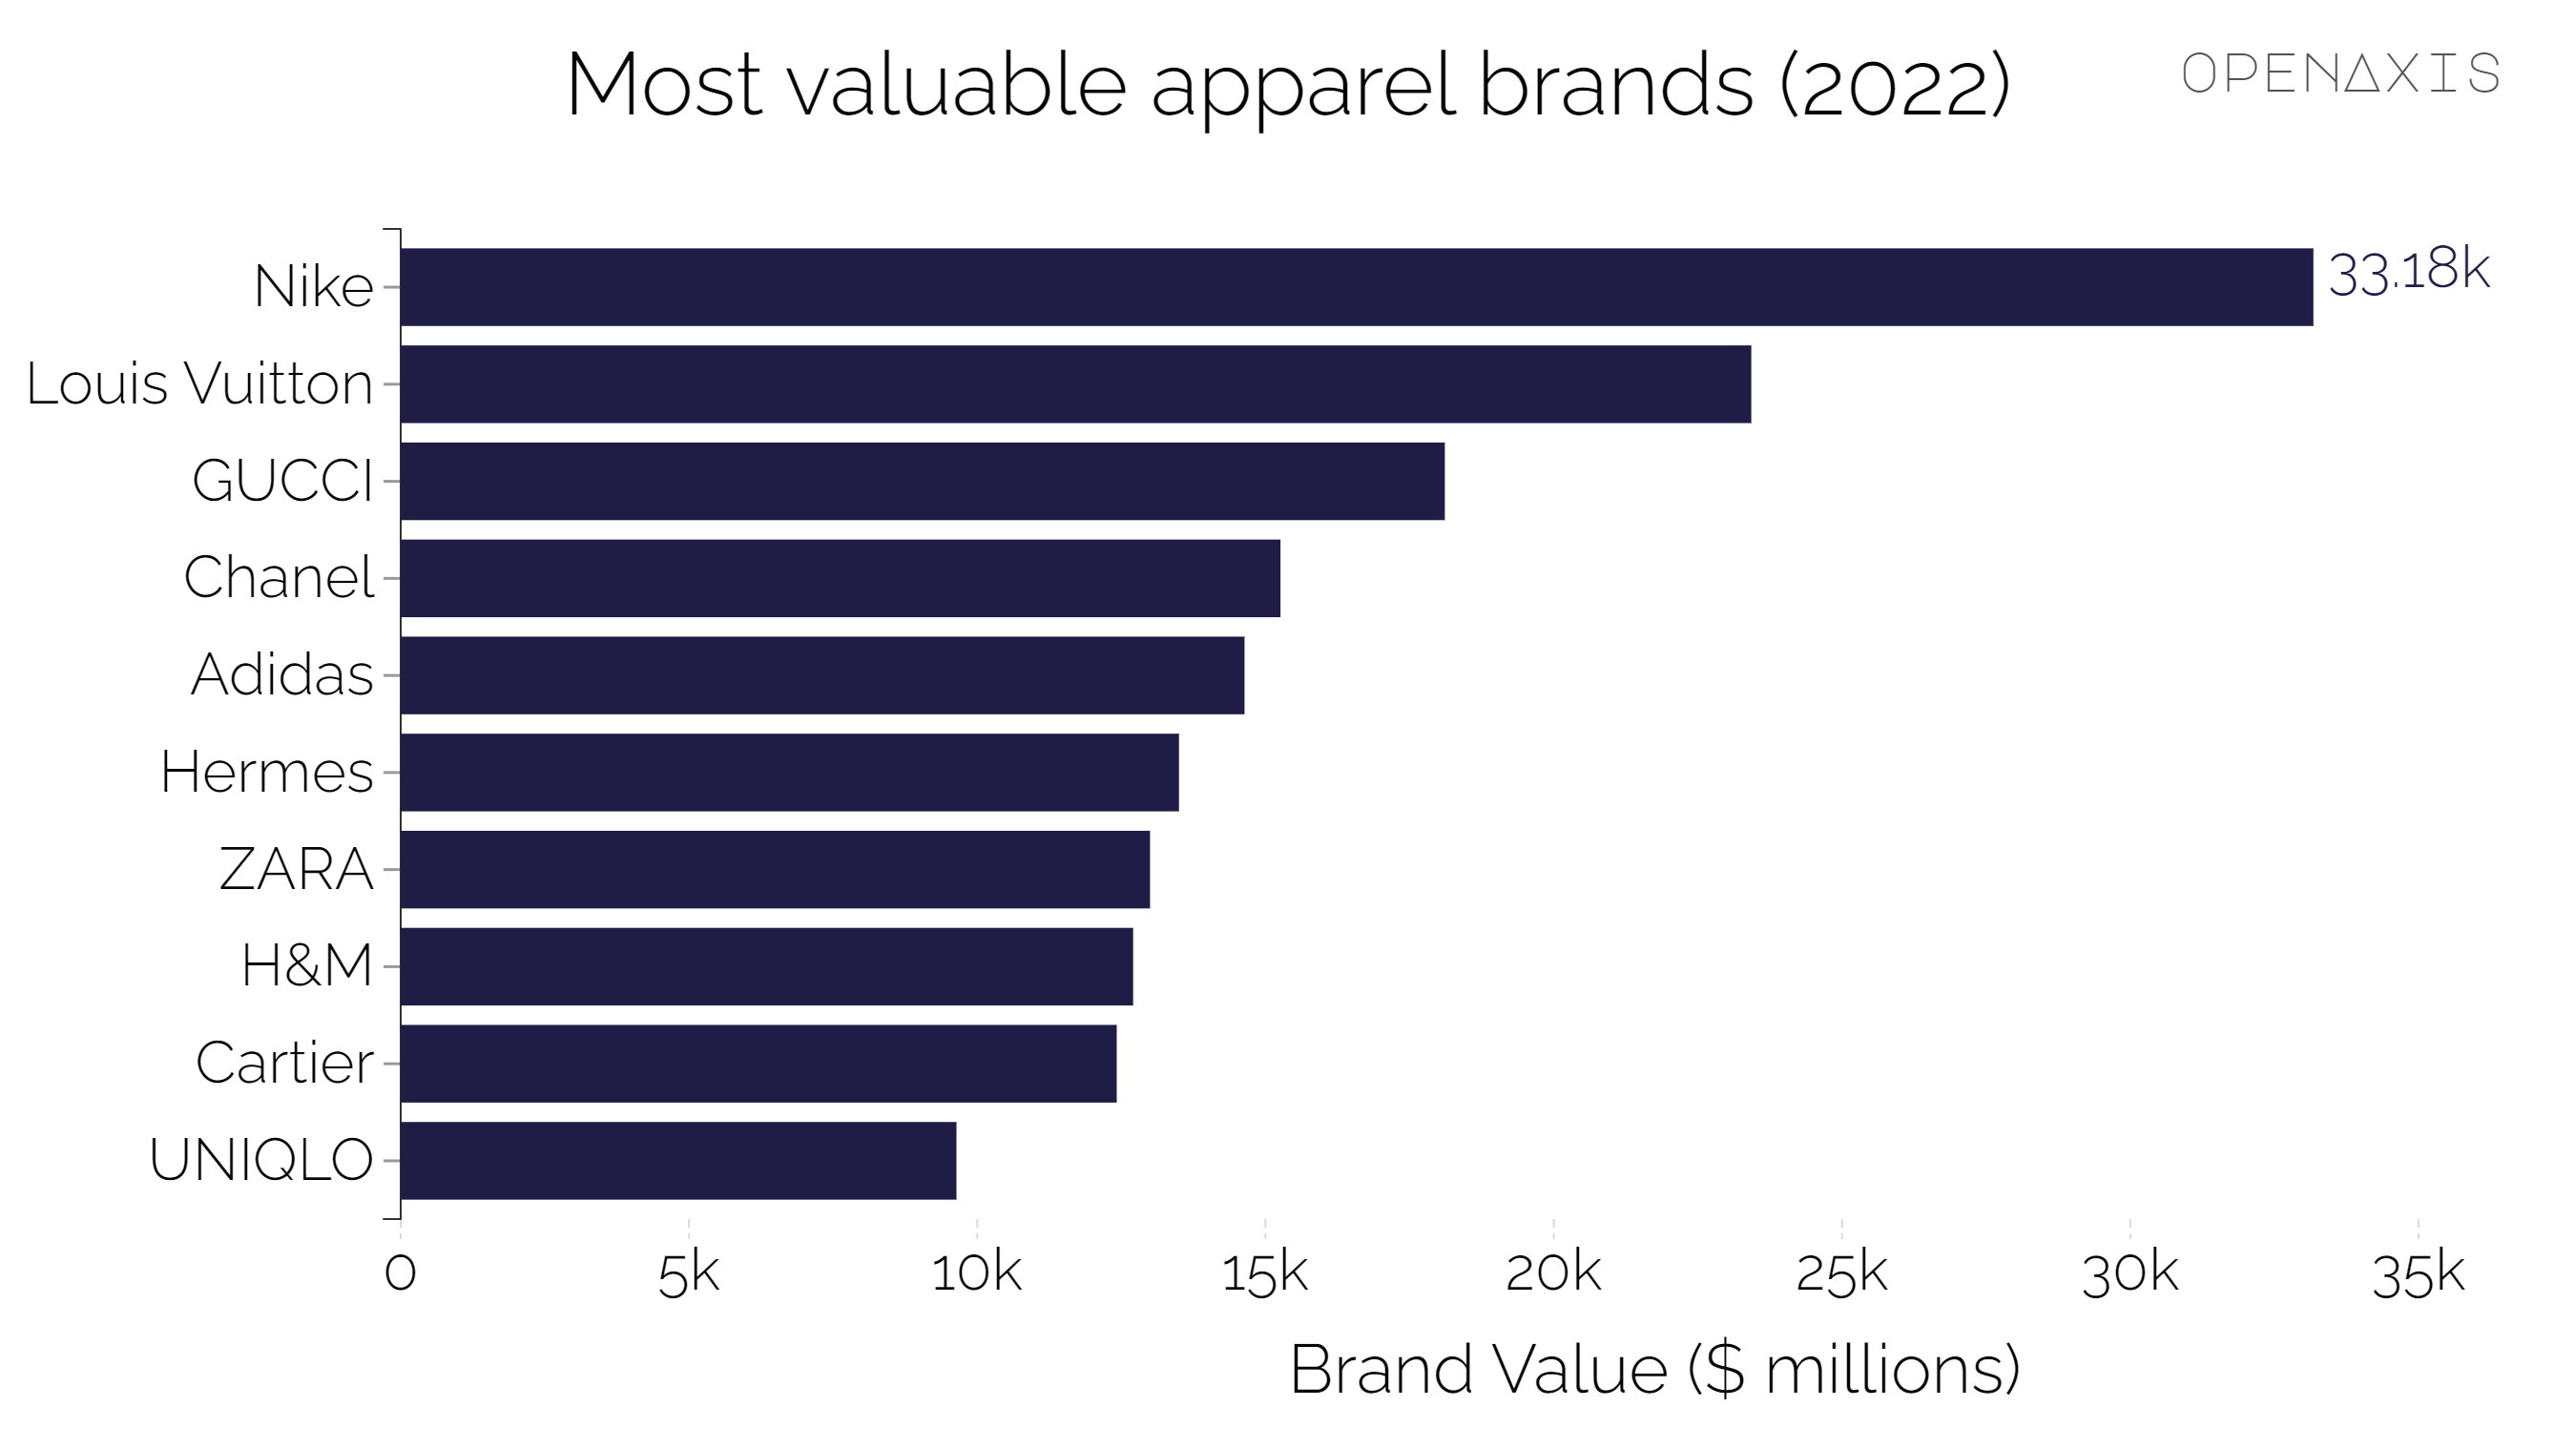 <p>Nike retains title as world’s most valuable apparel brand while luxury brands boom after COVID-19.</p><p><br /></p><p>Brand value refers to the present value of earnings specifically related to brand reputation. Organisations own and control these earnings by owning trademark rights.</p><p><br /></p><p><span data-index="0" data-denotation-char data-id="0" data-value="&lt;a href=&quot;/search?q=%23brands&quot; target=_self&gt;#brands" data-link="/search?q=%23brands">﻿<span contenteditable="false"><span></span><a href="/search?q=%23brands" target="_self">#brands</a></span>﻿</span> <span data-index="0" data-denotation-char data-id="0" data-value="&lt;a href=&quot;/search?q=%23fashion&quot; target=_self&gt;#fashion" data-link="/search?q=%23fashion">﻿<span contenteditable="false"><span></span><a href="/search?q=%23fashion" target="_self">#fashion</a></span>﻿</span> <span data-index="0" data-denotation-char data-id="0" data-value="&lt;a href=&quot;/search?q=%23apparel&quot; target=_self&gt;#apparel" data-link="/search?q=%23apparel">﻿<span contenteditable="false"><span></span><a href="/search?q=%23apparel" target="_self">#apparel</a></span>﻿</span></p><p><br /></p><p>Source: <a href="/data/3922" target="_blank">Brand Finance Annual Report</a></p><p><br /></p>